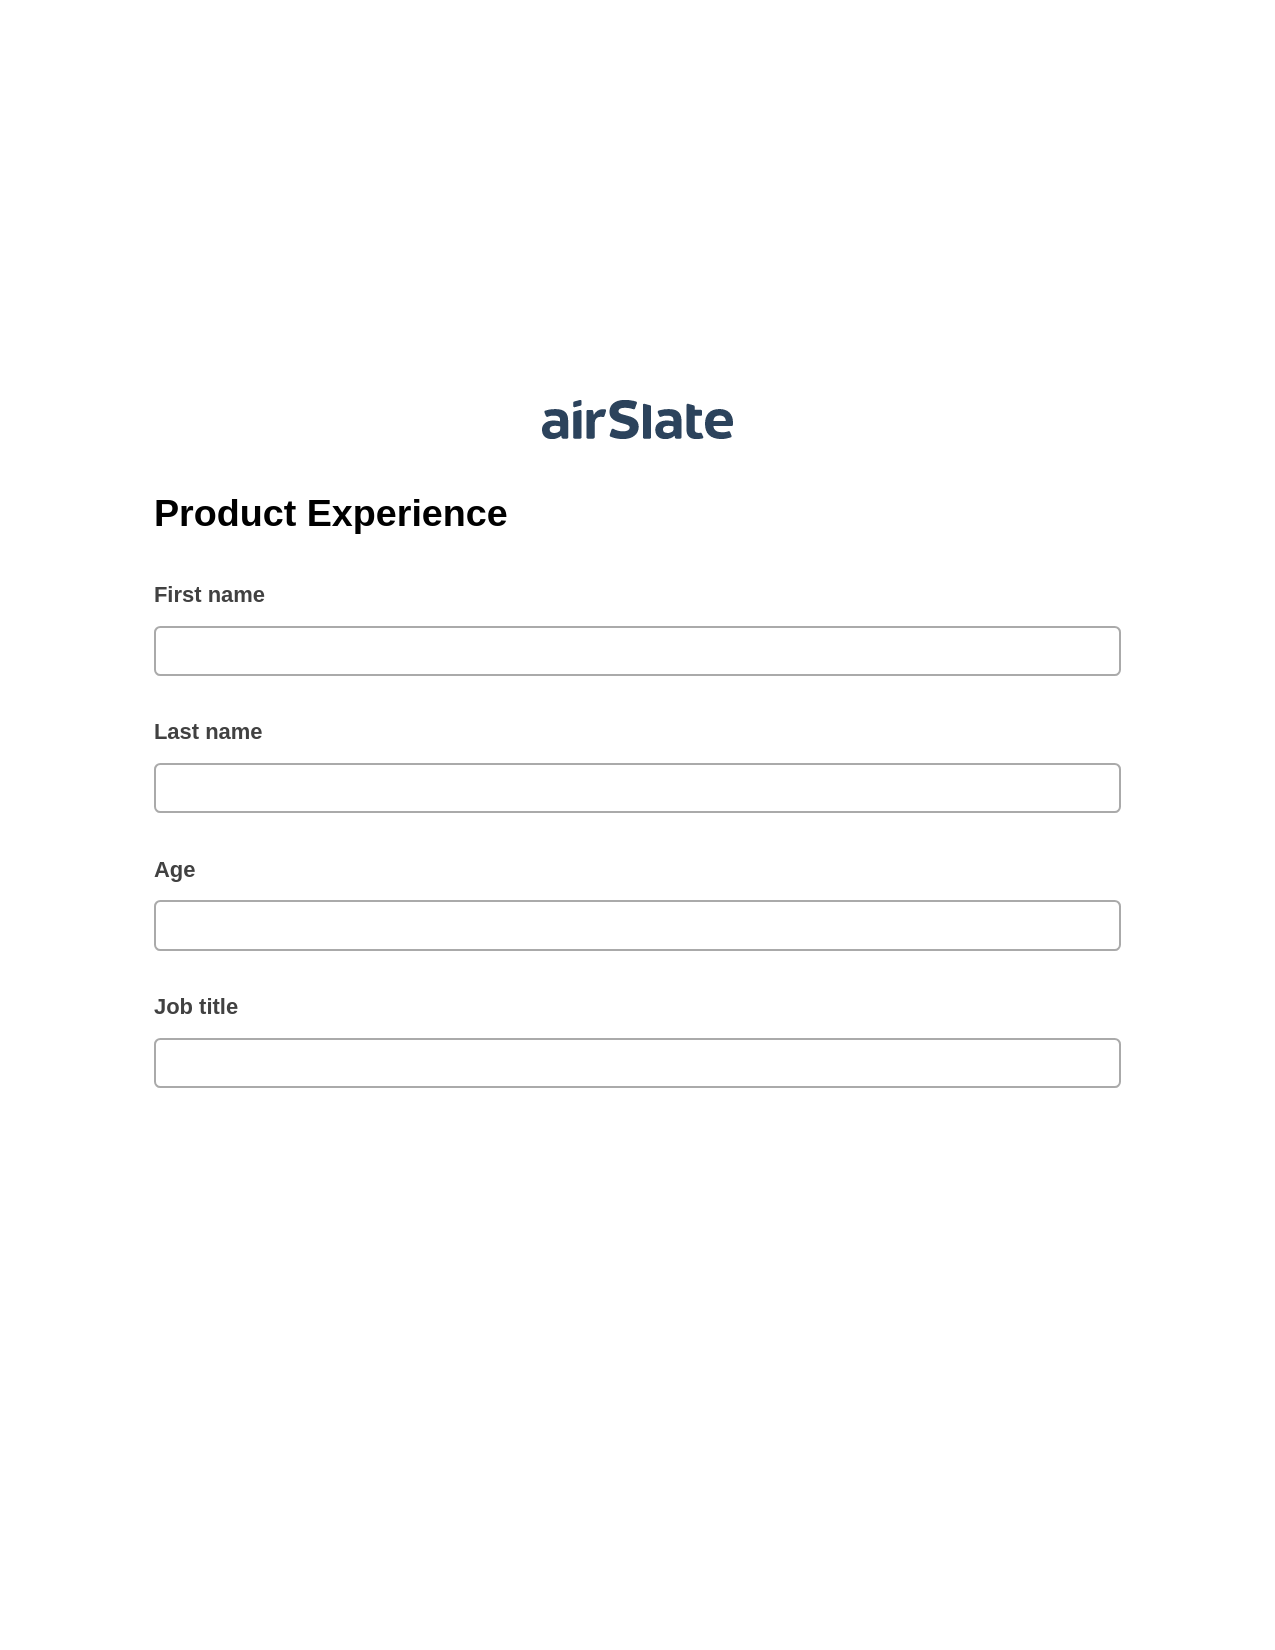 Product Experience Pre-fill Dropdowns from CSV file Bot, Assign Roles to Recipients Bot, Export to Excel 365 Bot